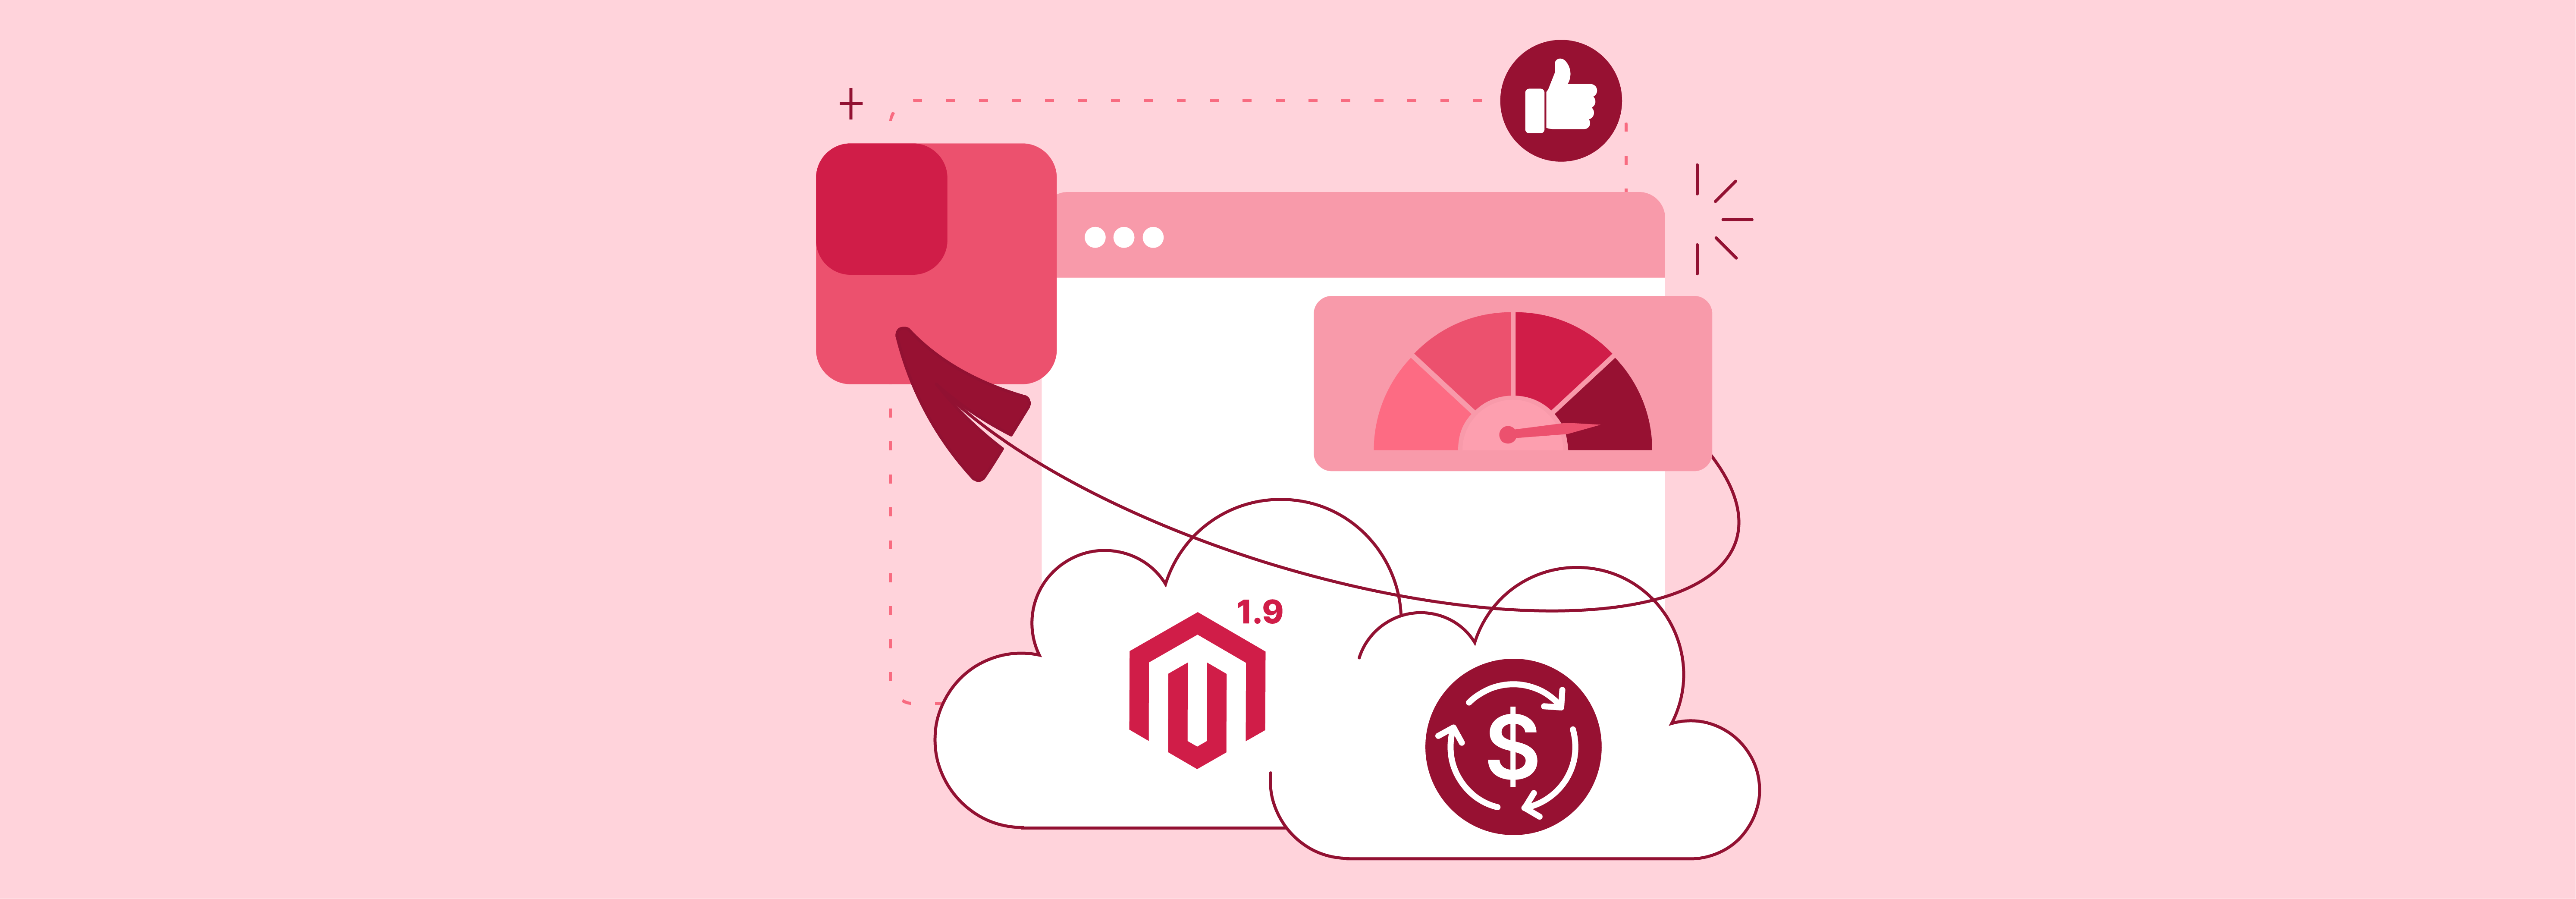 Benefits of Cloud Hosting for Magento 1.9 - Scalability and Reliability